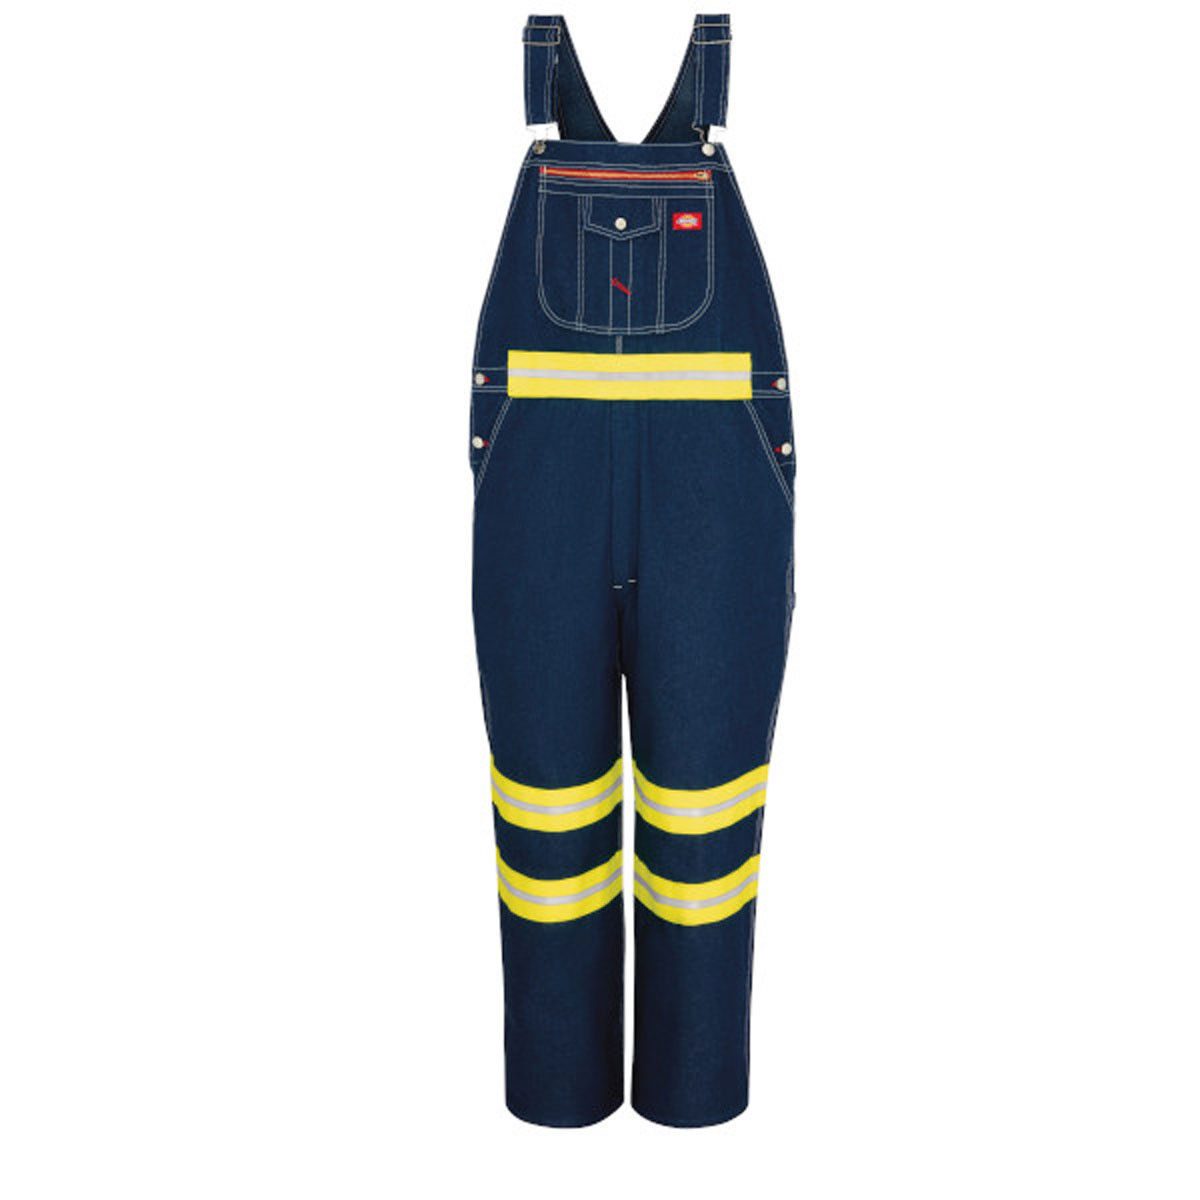 Does the Dickies overalls have a zip or button closure?